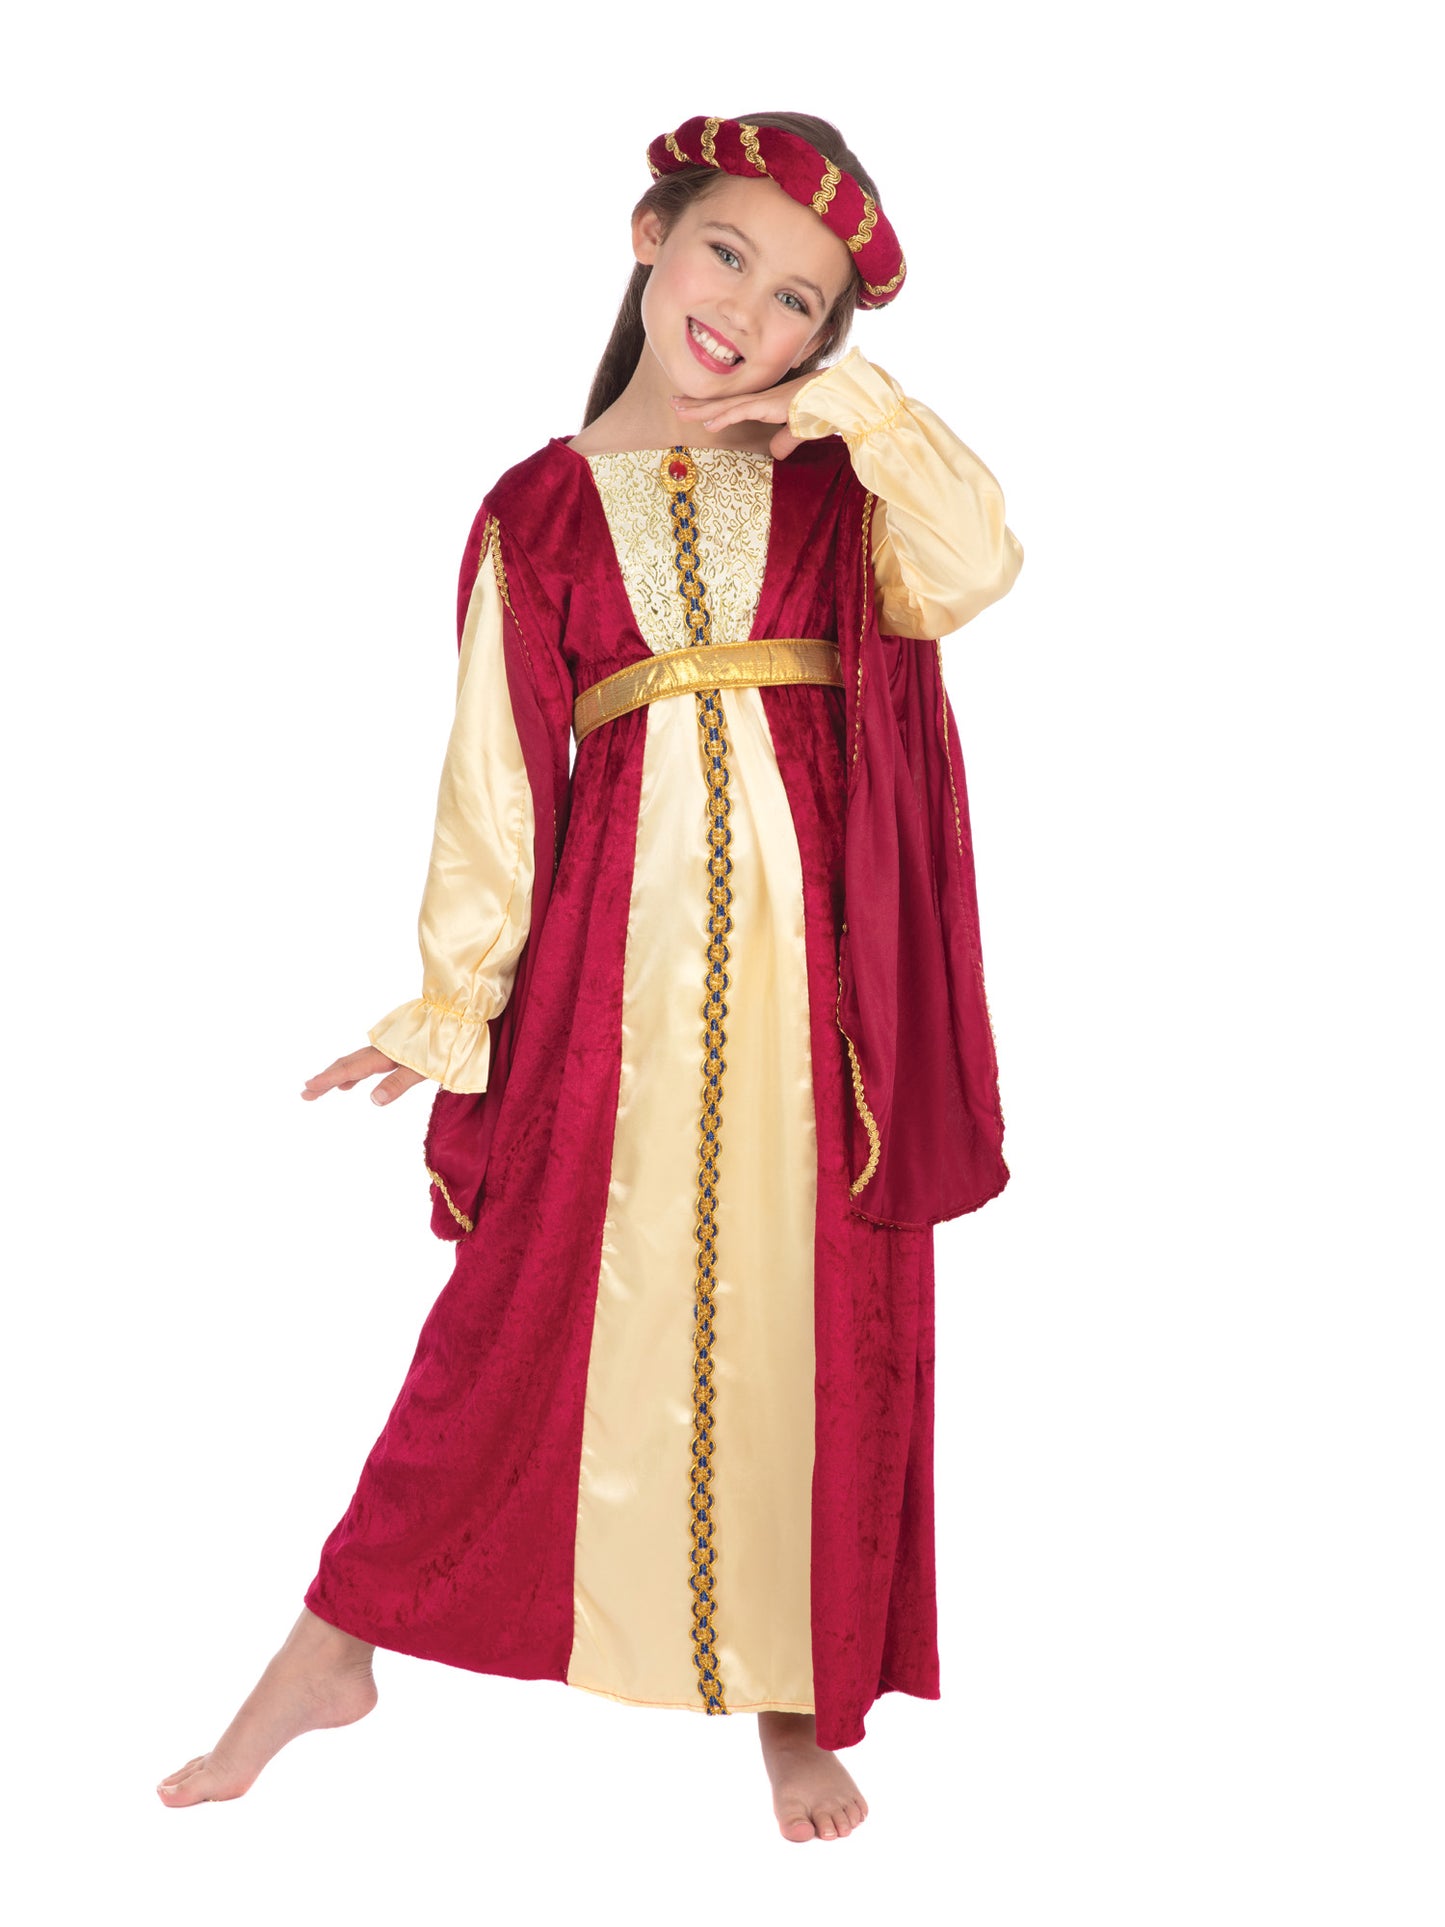 Girls Medieval Costumes